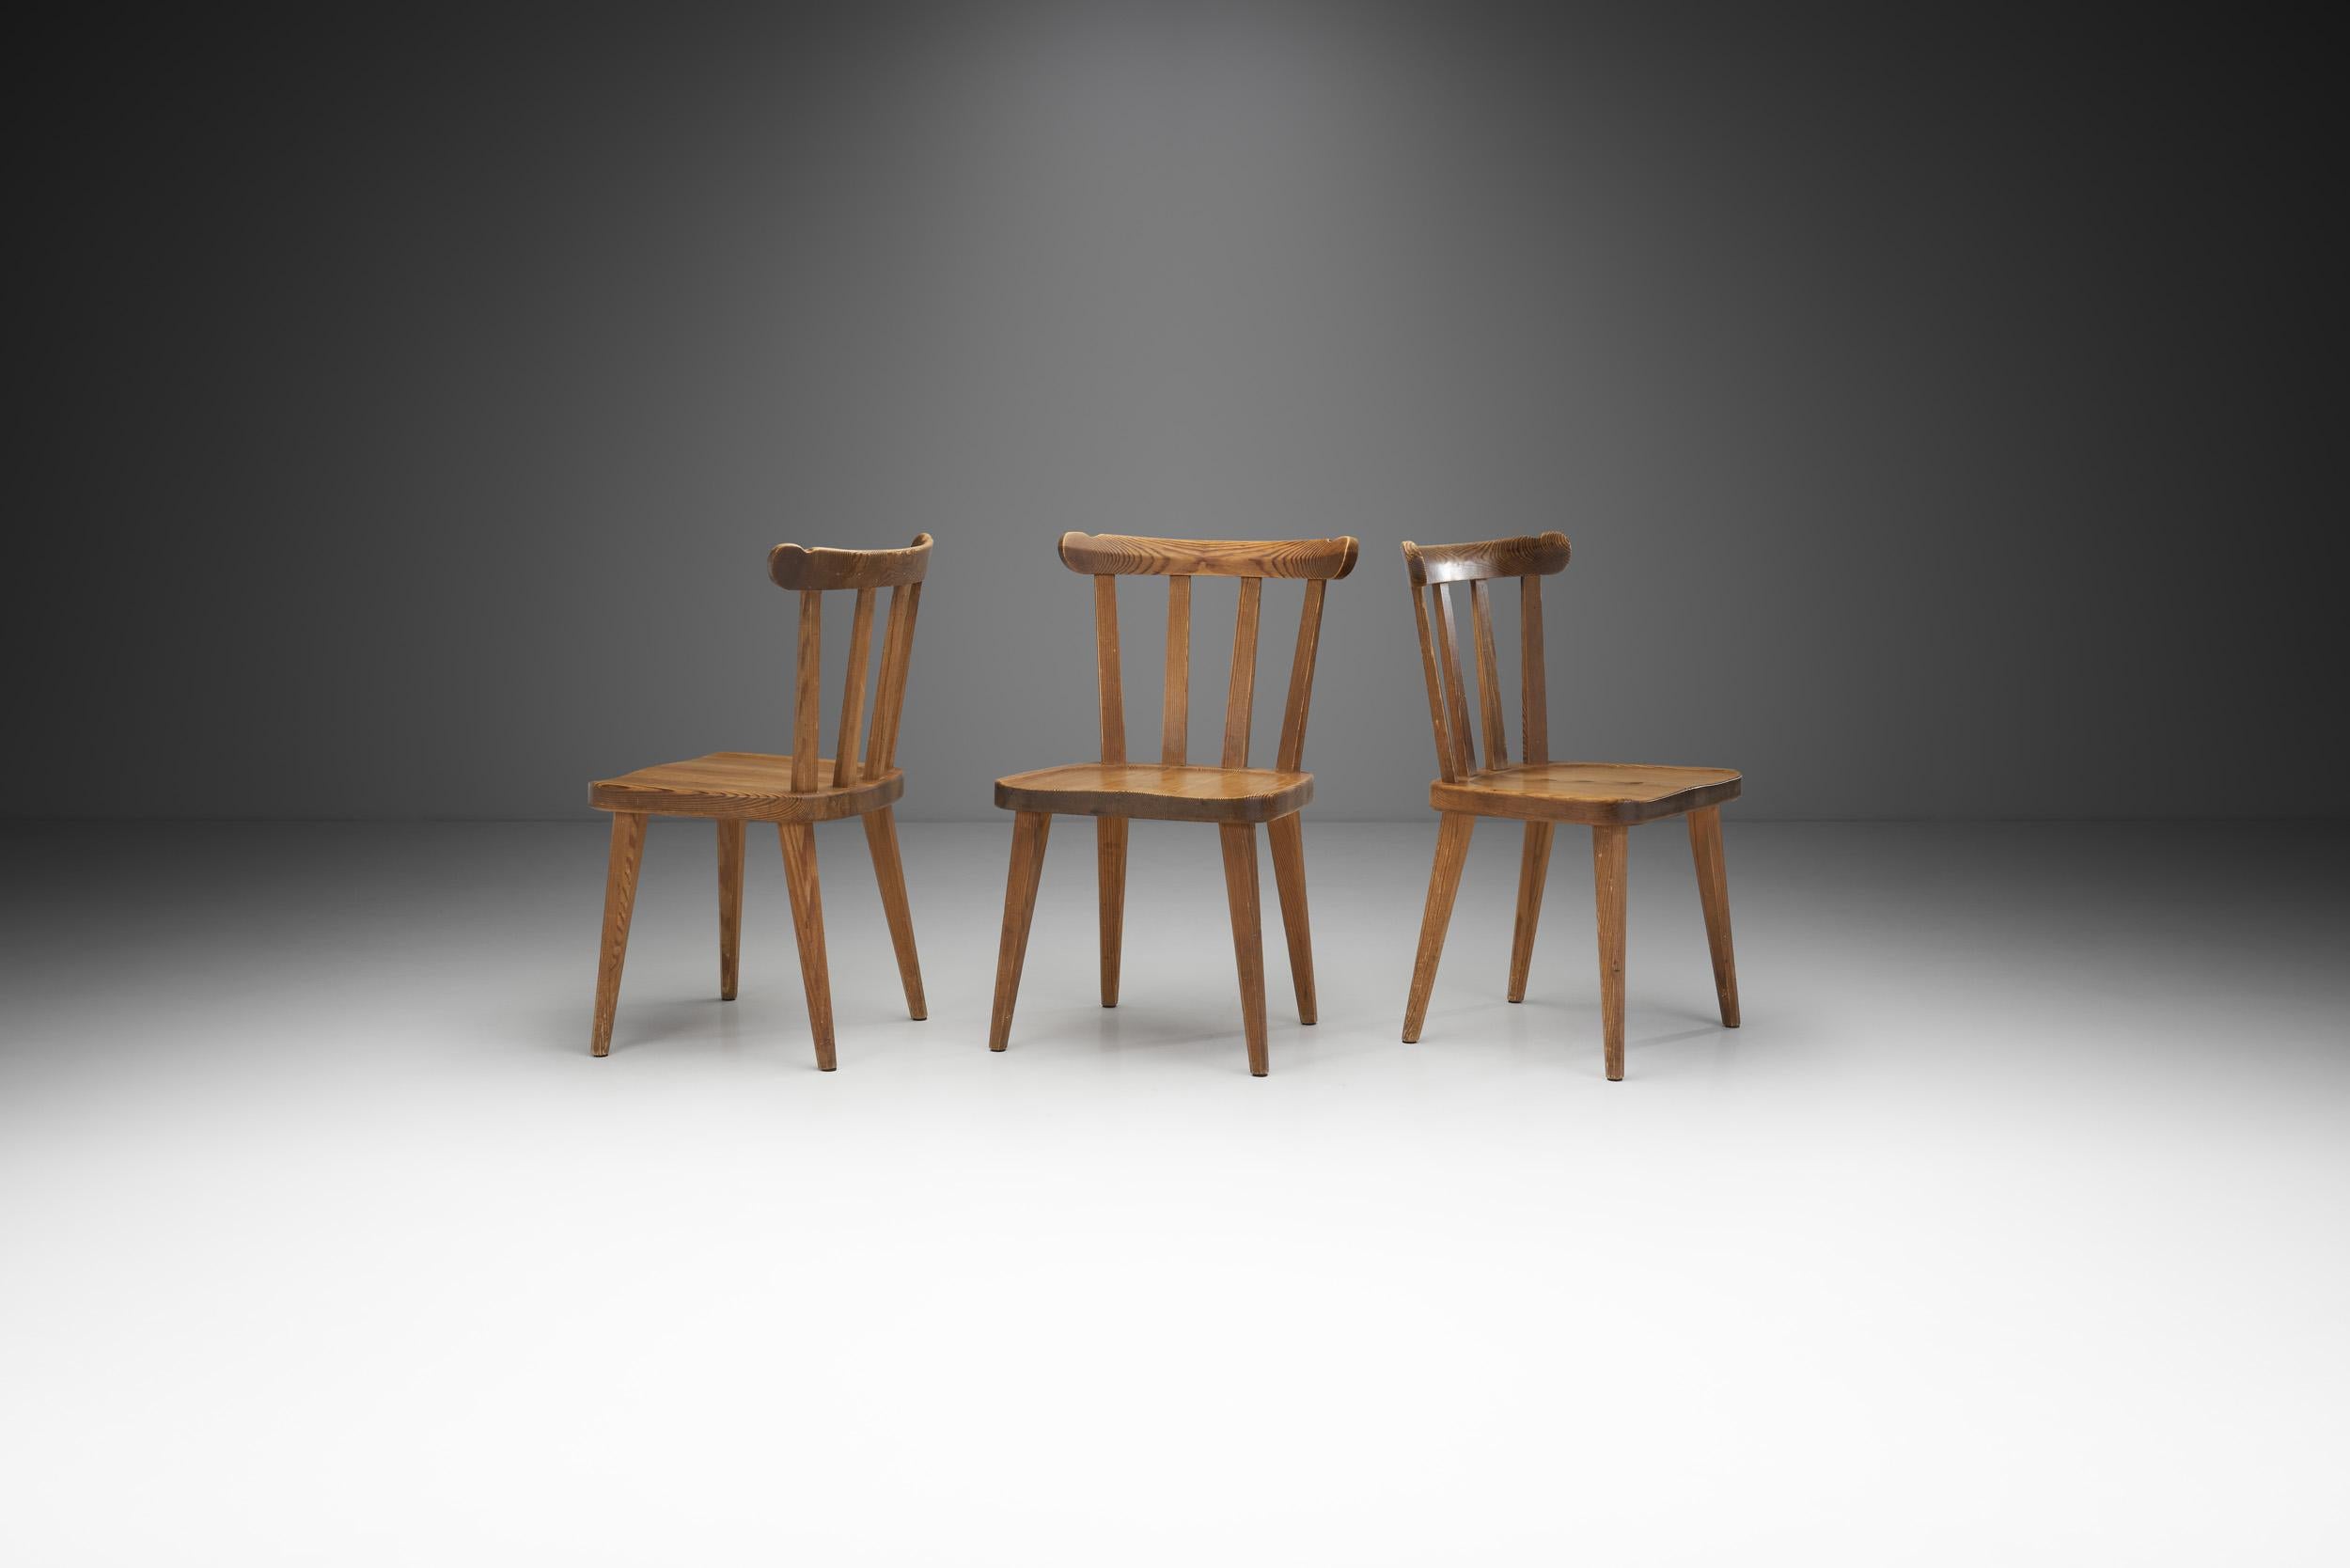 These “Ekerö” chairs are often compared to Axel Einar Hjorth’s Utö model, and not without a reason. These models are often mentioned together thanks to their material and visual resemblance. Both models were produced by Nordiska Kompaniet during the